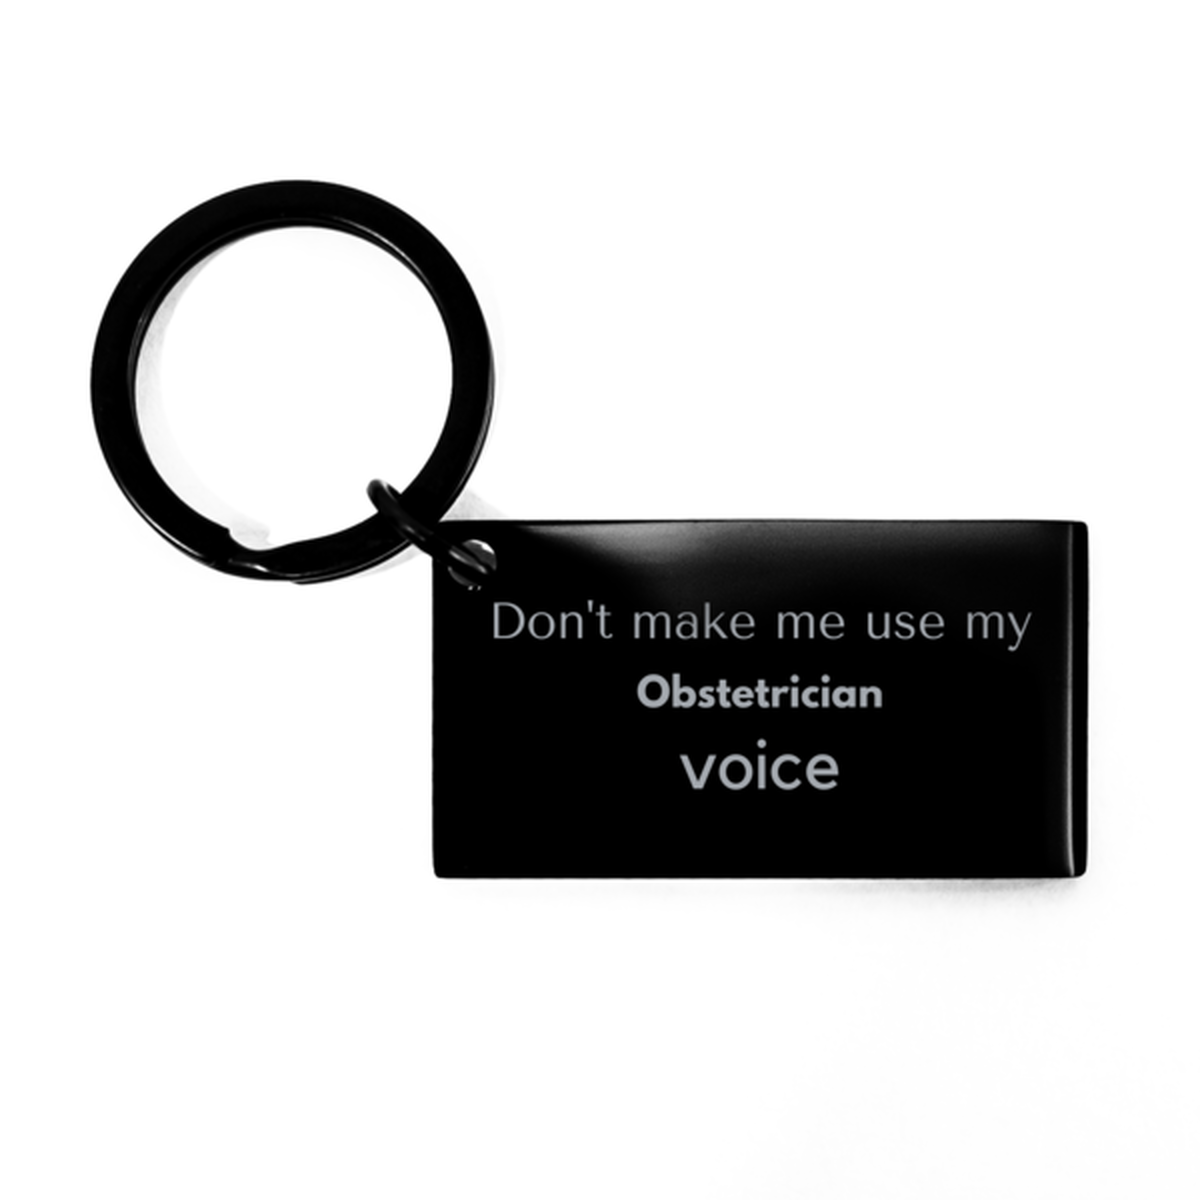 Don't make me use my Obstetrician voice, Sarcasm Obstetrician Gifts, Christmas Obstetrician Keychain Birthday Unique Gifts For Obstetrician Coworkers, Men, Women, Colleague, Friends